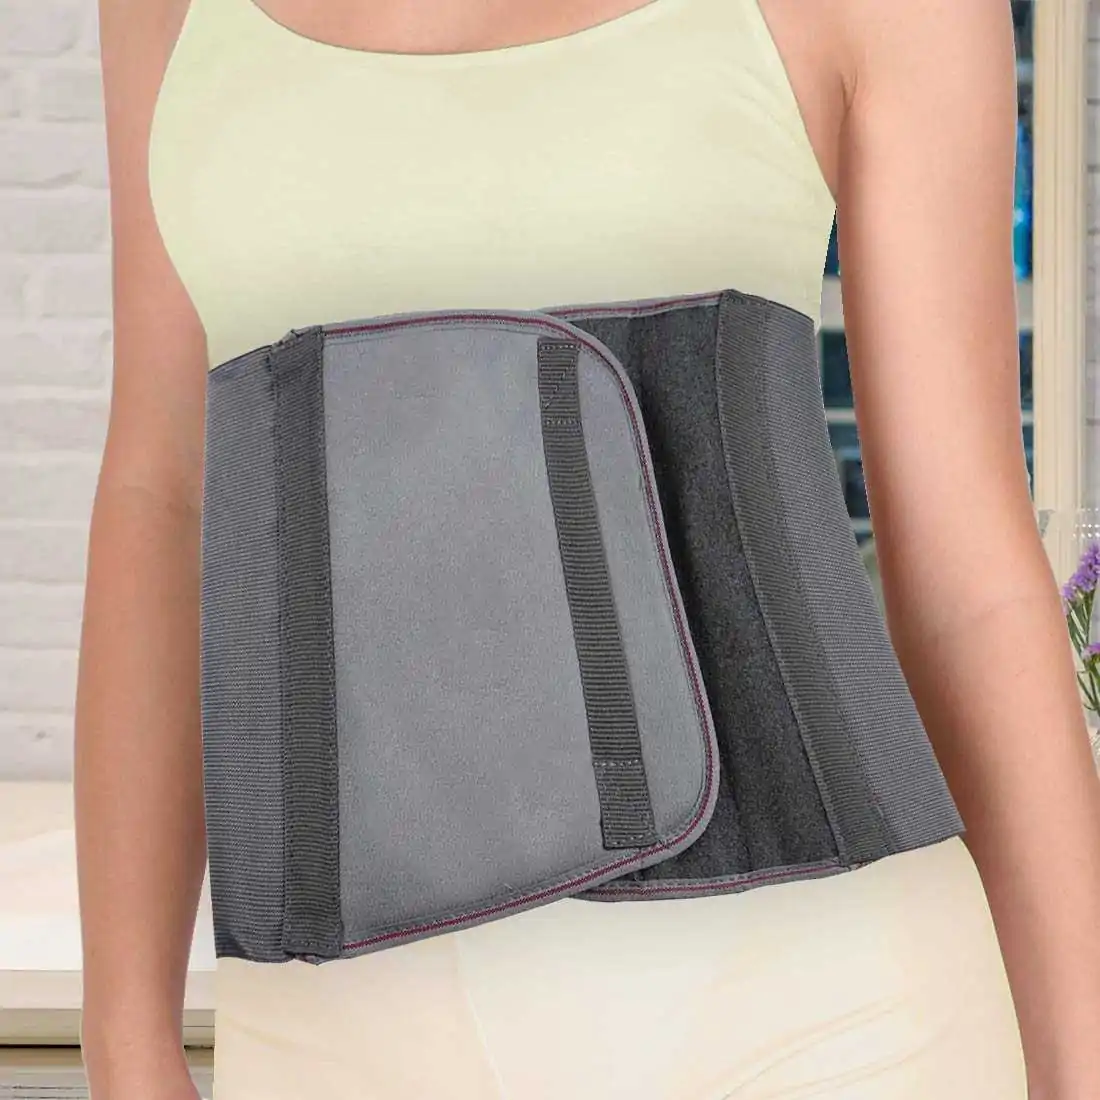 Mylo Post Pregnancy Support & Recovery Belt for Compression Support - Grey (M)